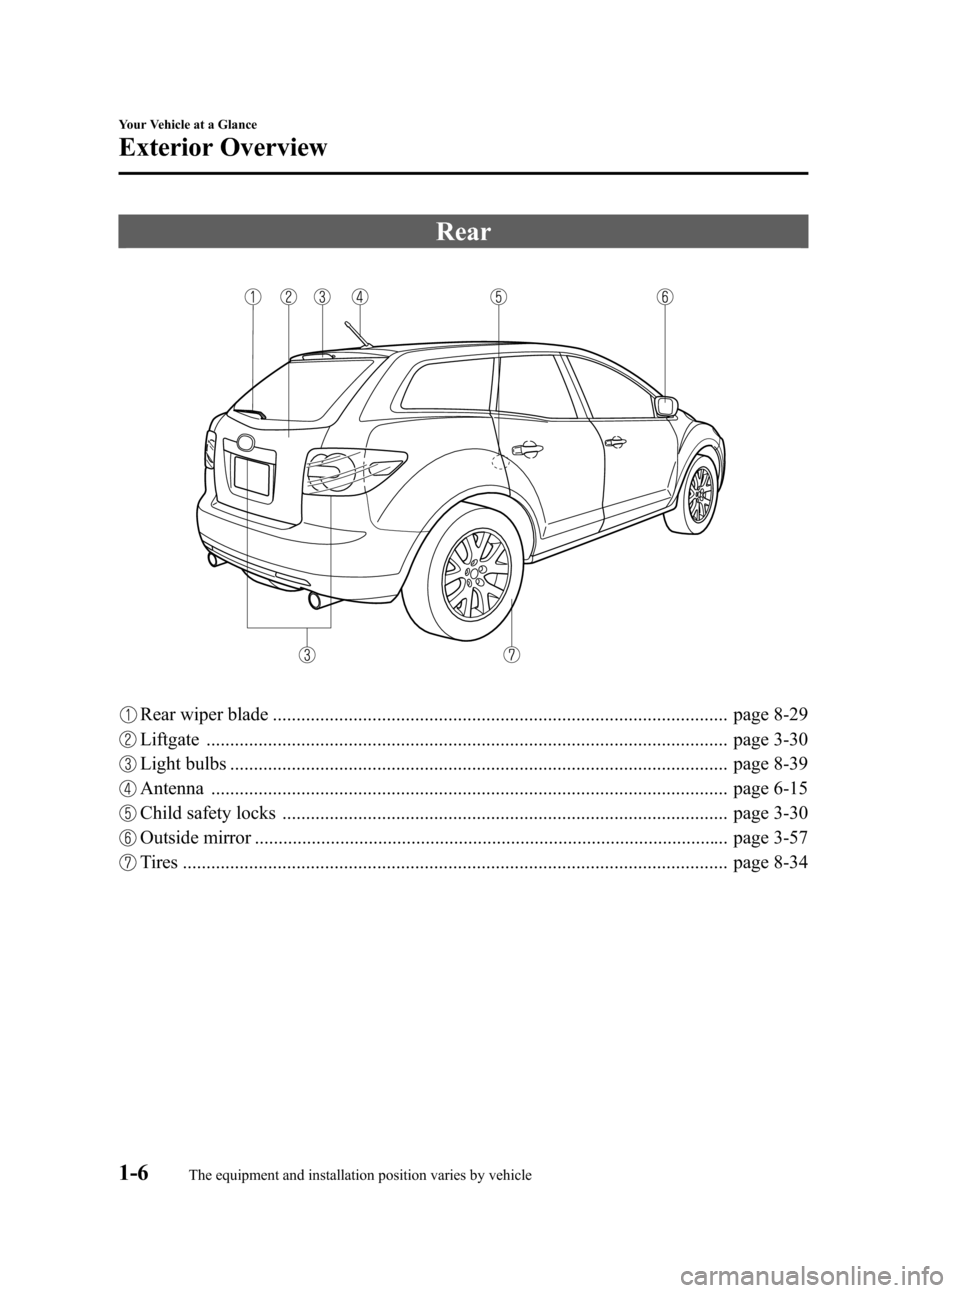 MAZDA MODEL CX-7 2009  Owners Manual (in English) Black plate (12,1)
Rear
Rear wiper blade ................................................................................................ page 8-29
Liftgate ...........................................